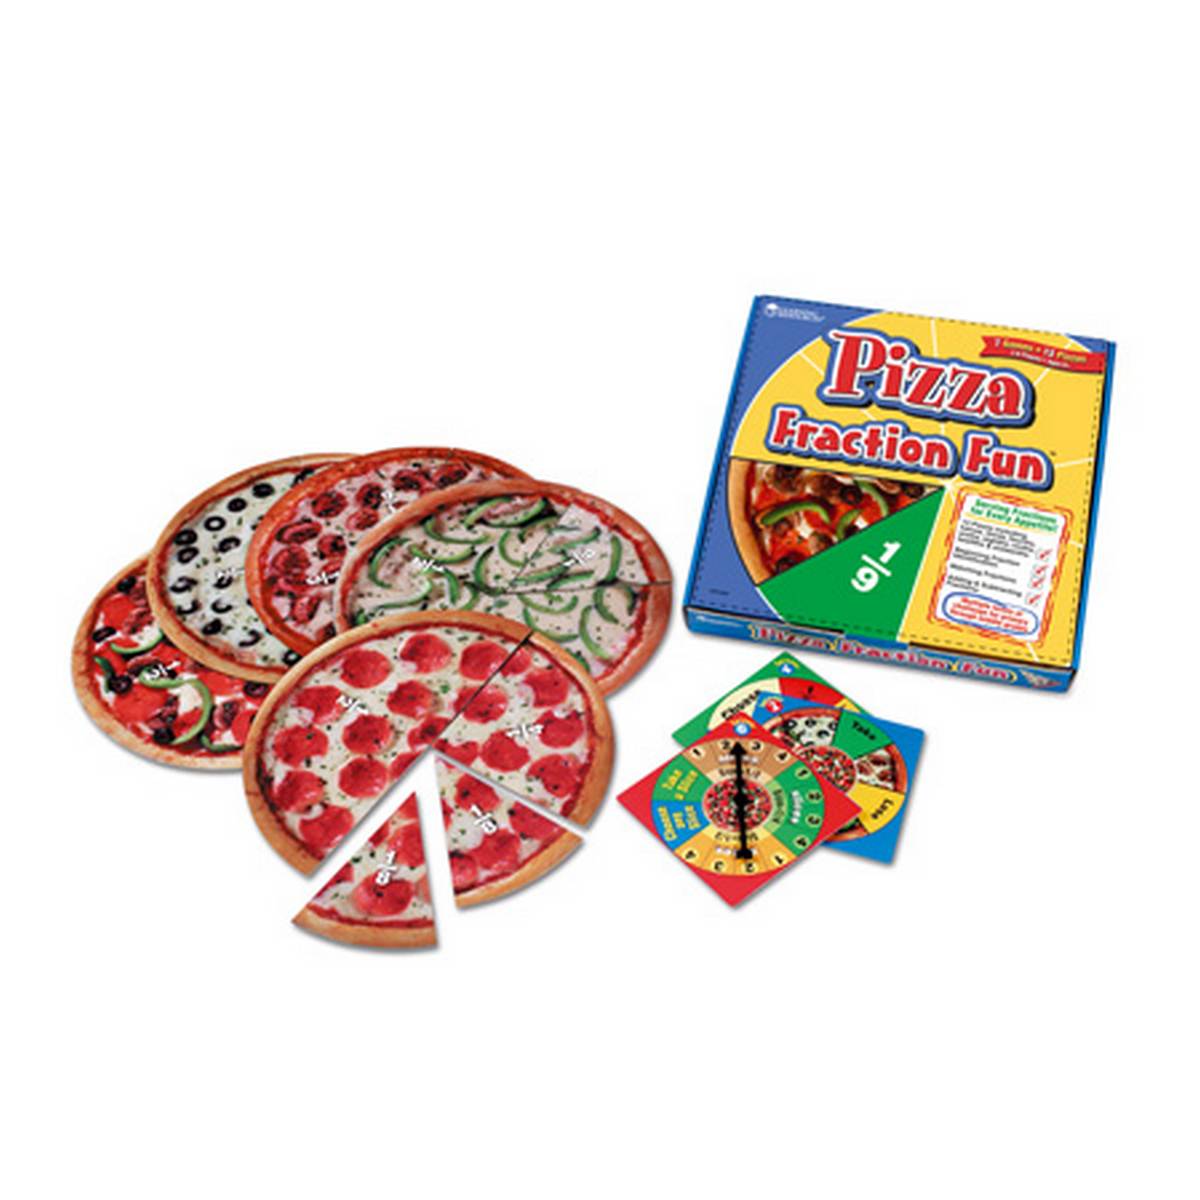 Pizza Fraction Fun  Game